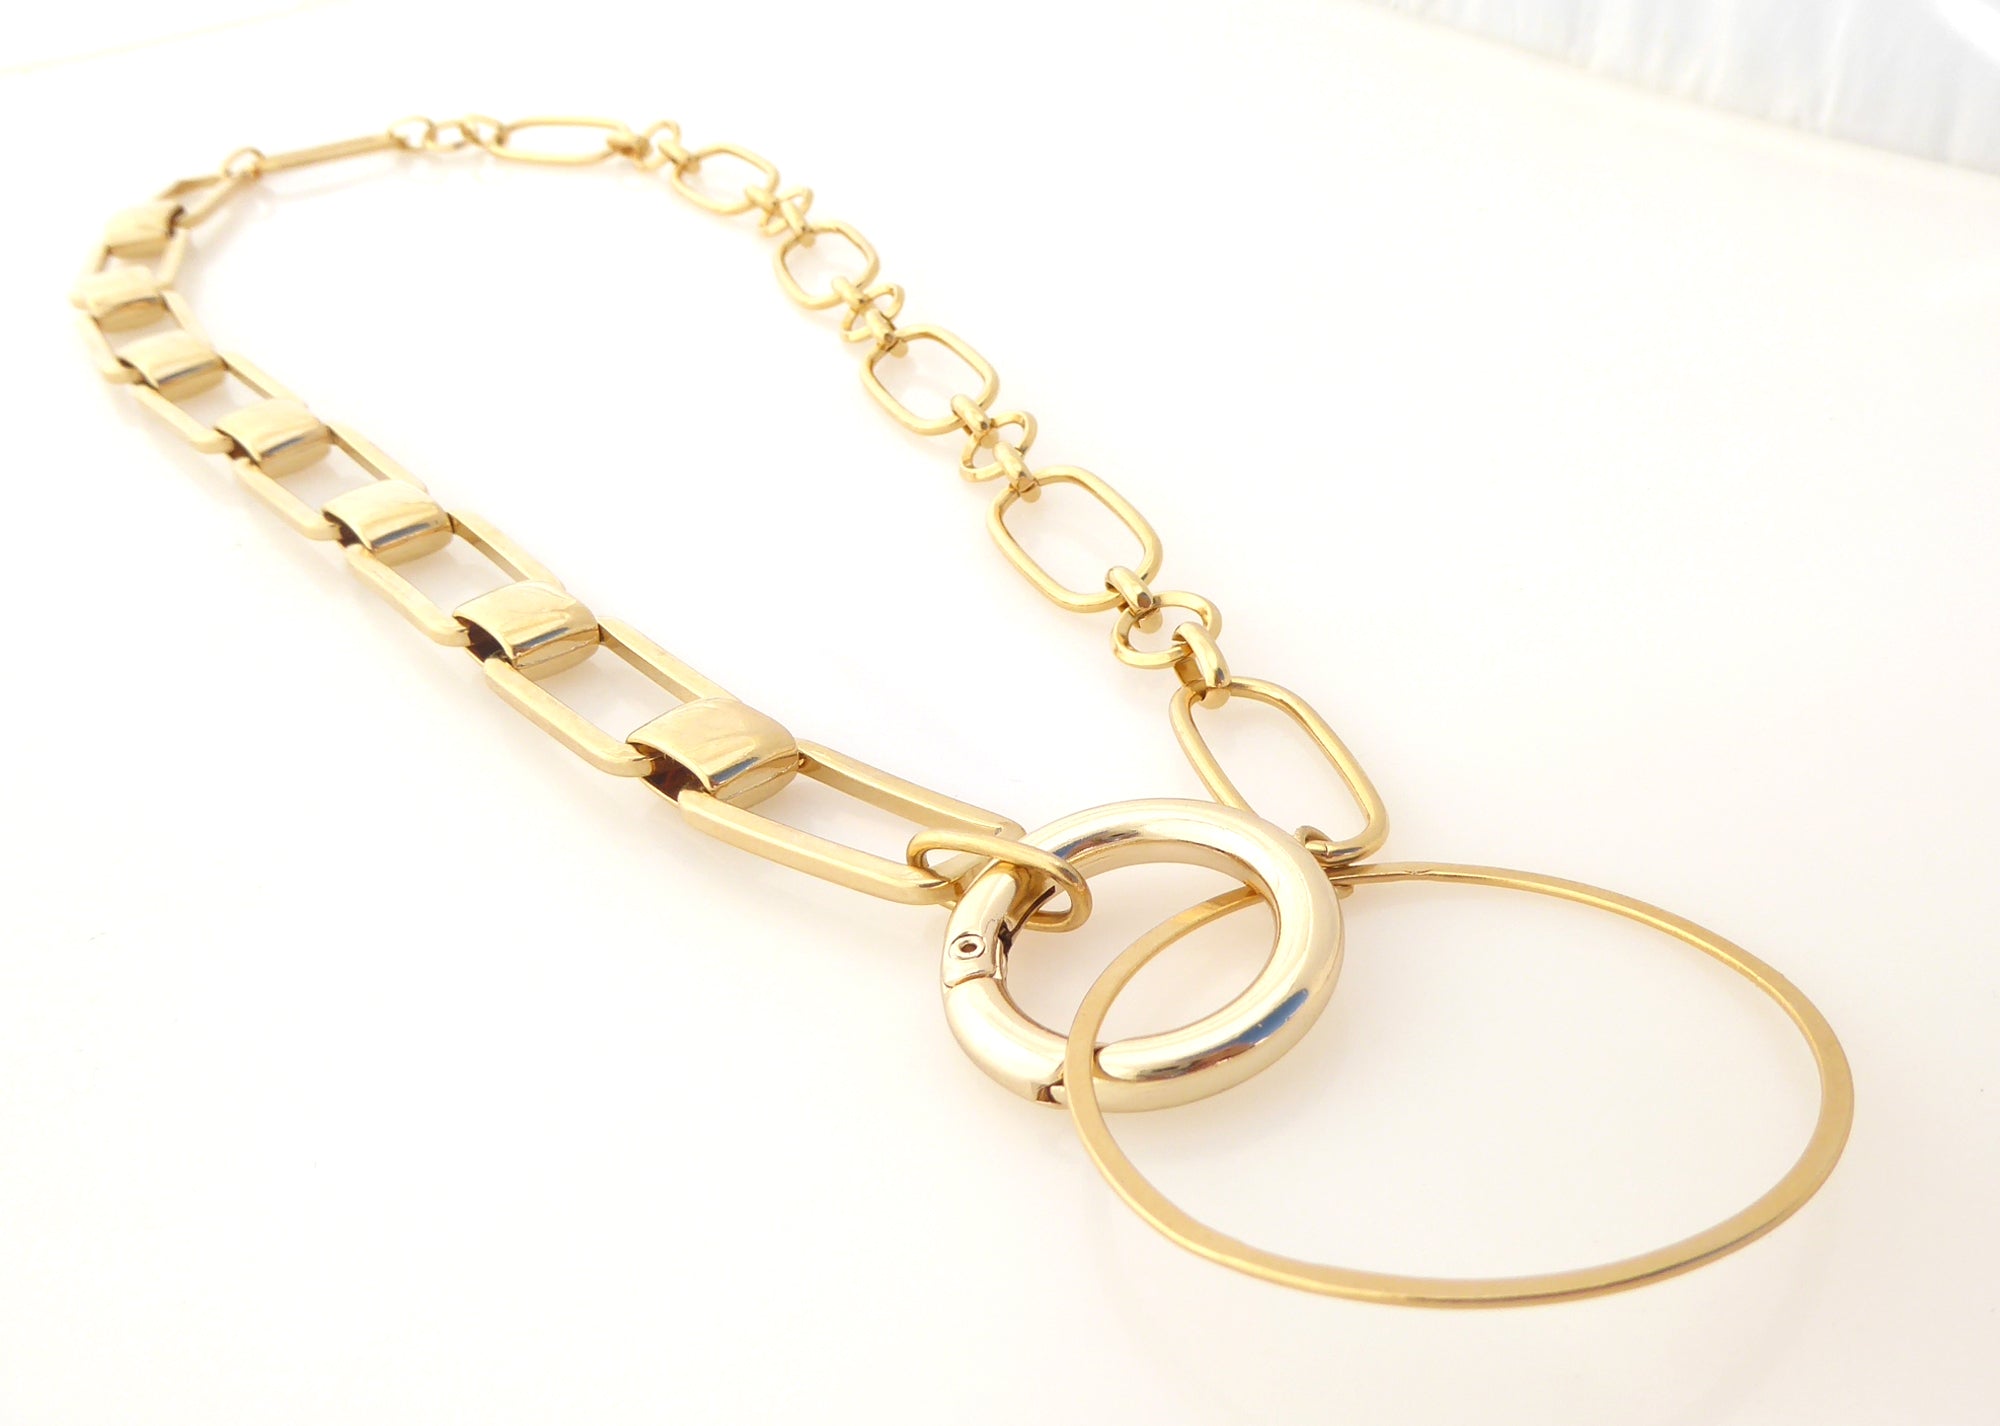 Gold geometric link necklace